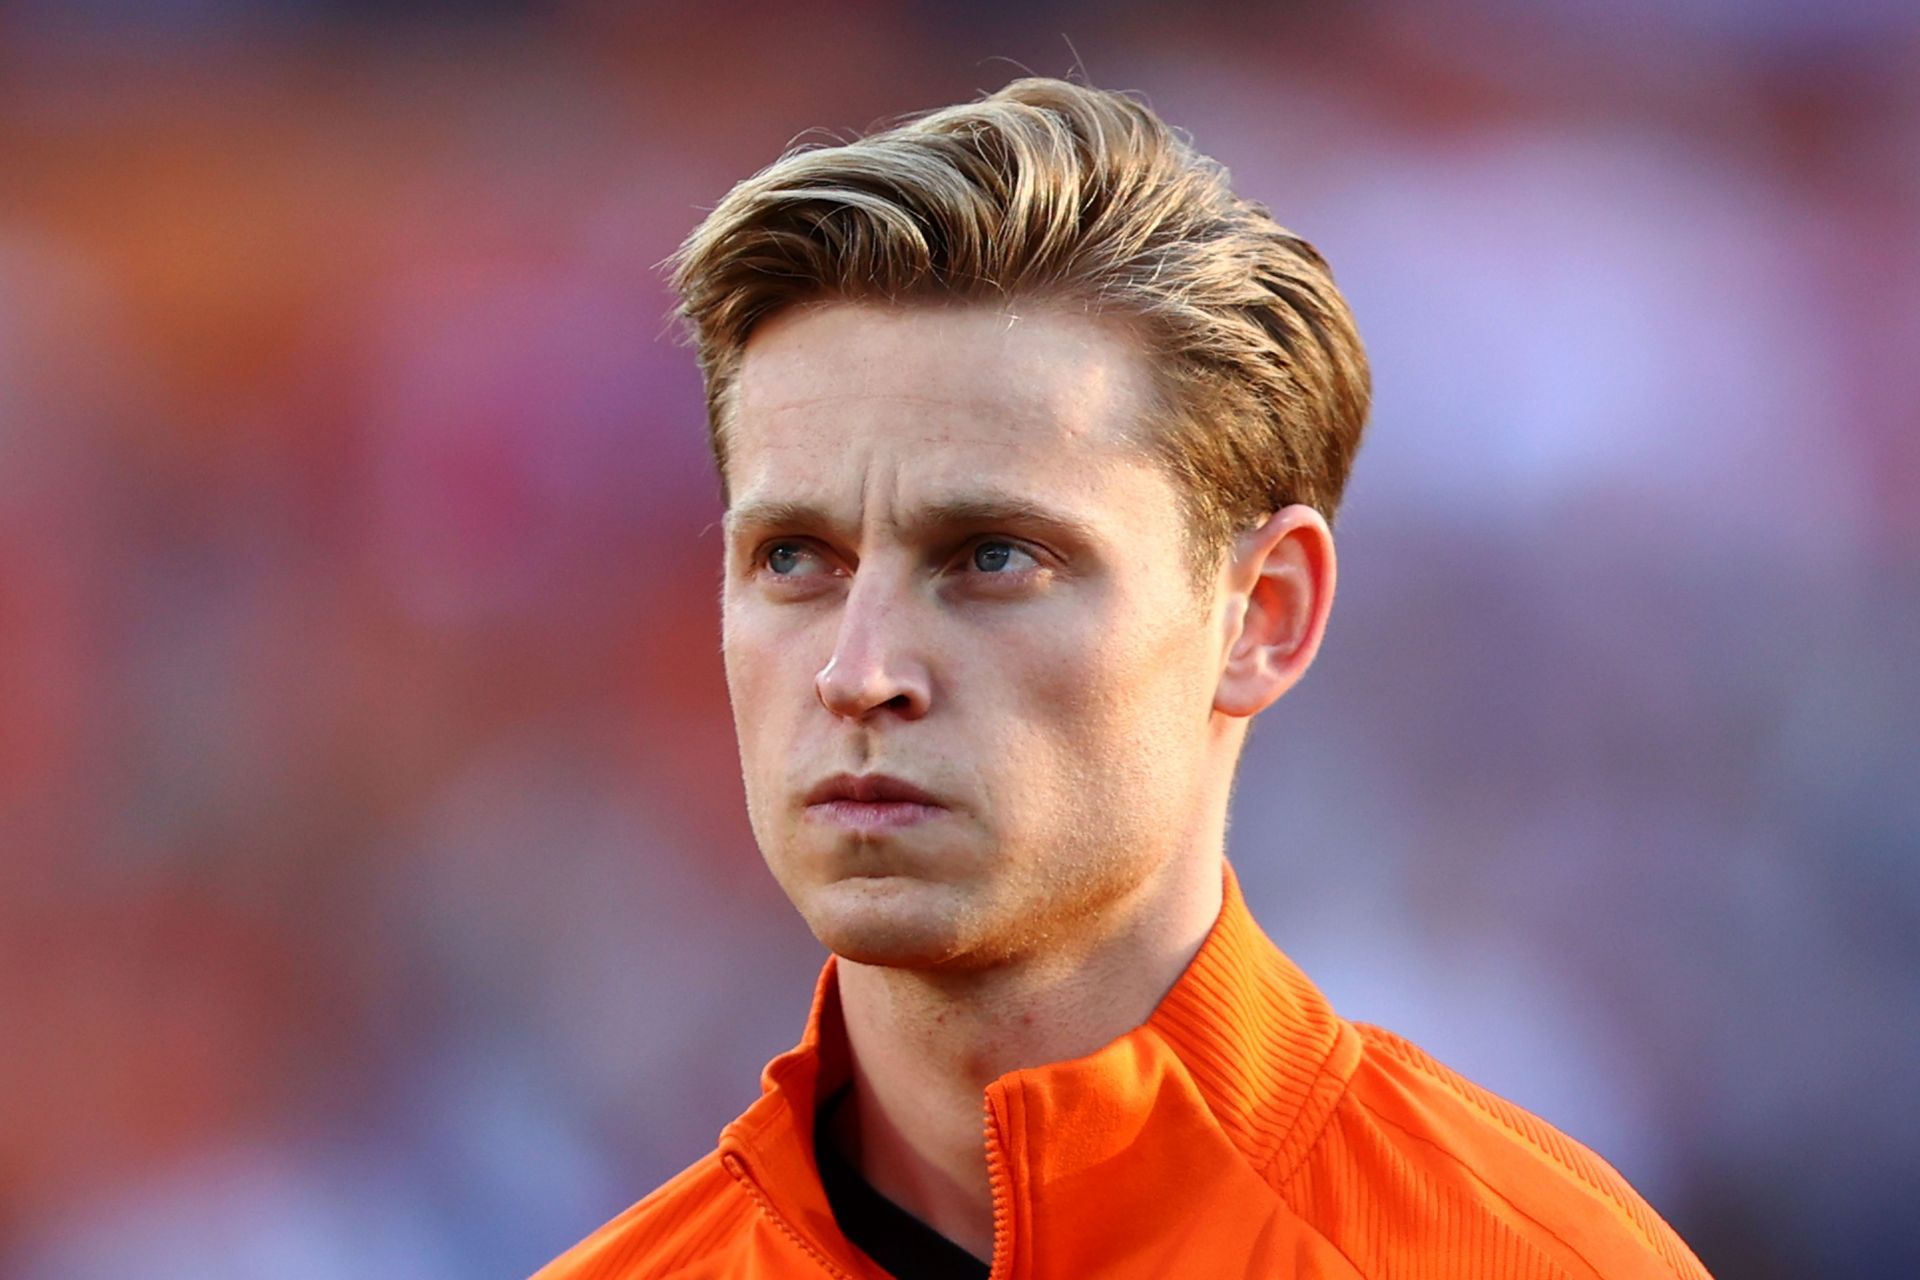 Frenkie de Jong is likely to arrive at Old Trafford this summer.